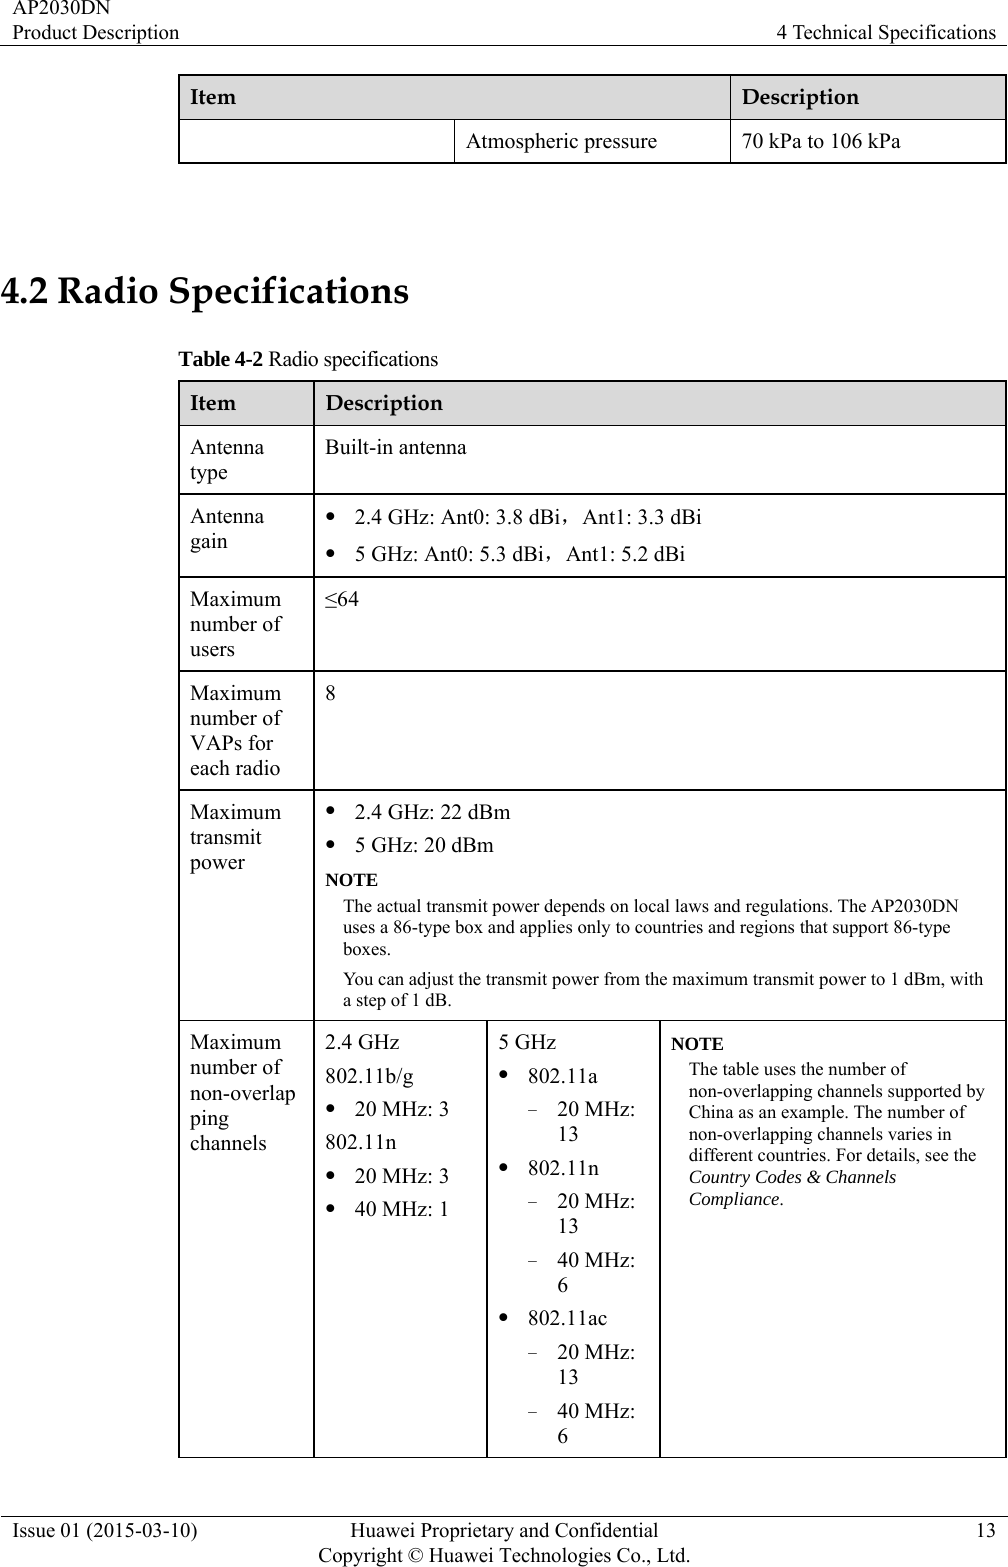 AP2030DN Product Description  4 Technical Specifications Issue 01 (2015-03-10)  Huawei Proprietary and Confidential         Copyright © Huawei Technologies Co., Ltd.13 Item  Description Atmospheric pressure  70 kPa to 106 kPa  4.2 Radio Specifications Table 4-2 Radio specifications Item  Description Antenna type Built-in antenna Antenna gain z 2.4 GHz: Ant0: 3.8 dBi，Ant1: 3.3 dBi z 5 GHz: Ant0: 5.3 dBi，Ant1: 5.2 dBi Maximum number of users ≤64 Maximum number of VAPs for each radio 8 Maximum transmit power z 2.4 GHz: 22 dBm   z 5 GHz: 20 dBm NOTE The actual transmit power depends on local laws and regulations. The AP2030DN uses a 86-type box and applies only to countries and regions that support 86-type boxes. You can adjust the transmit power from the maximum transmit power to 1 dBm, with a step of 1 dB. Maximum number of non-overlapping channels 2.4 GHz 802.11b/g z 20 MHz: 3 802.11n z 20 MHz: 3 z 40 MHz: 1 5 GHz z 802.11a − 20 MHz: 13 z 802.11n − 20 MHz: 13 − 40 MHz: 6 z 802.11ac − 20 MHz: 13 − 40 MHz: 6 NOTE The table uses the number of non-overlapping channels supported by China as an example. The number of non-overlapping channels varies in different countries. For details, see the Country Codes &amp; Channels Compliance. 